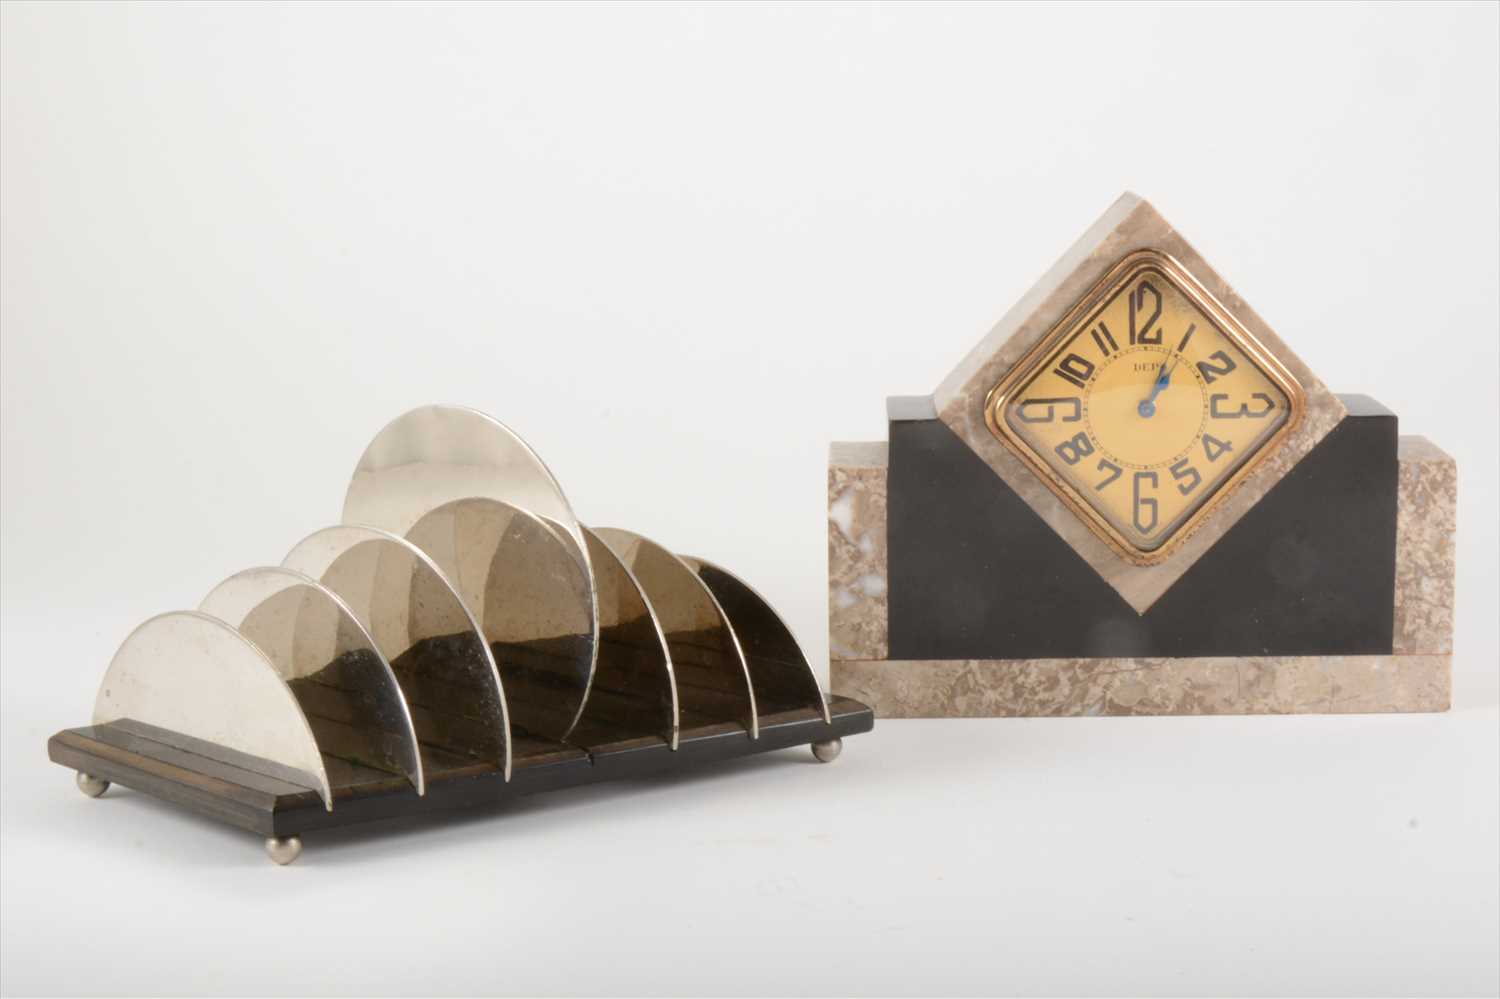 Lot 136 - A small Art Deco marble desk clock and an Art Deco steel toast rack.